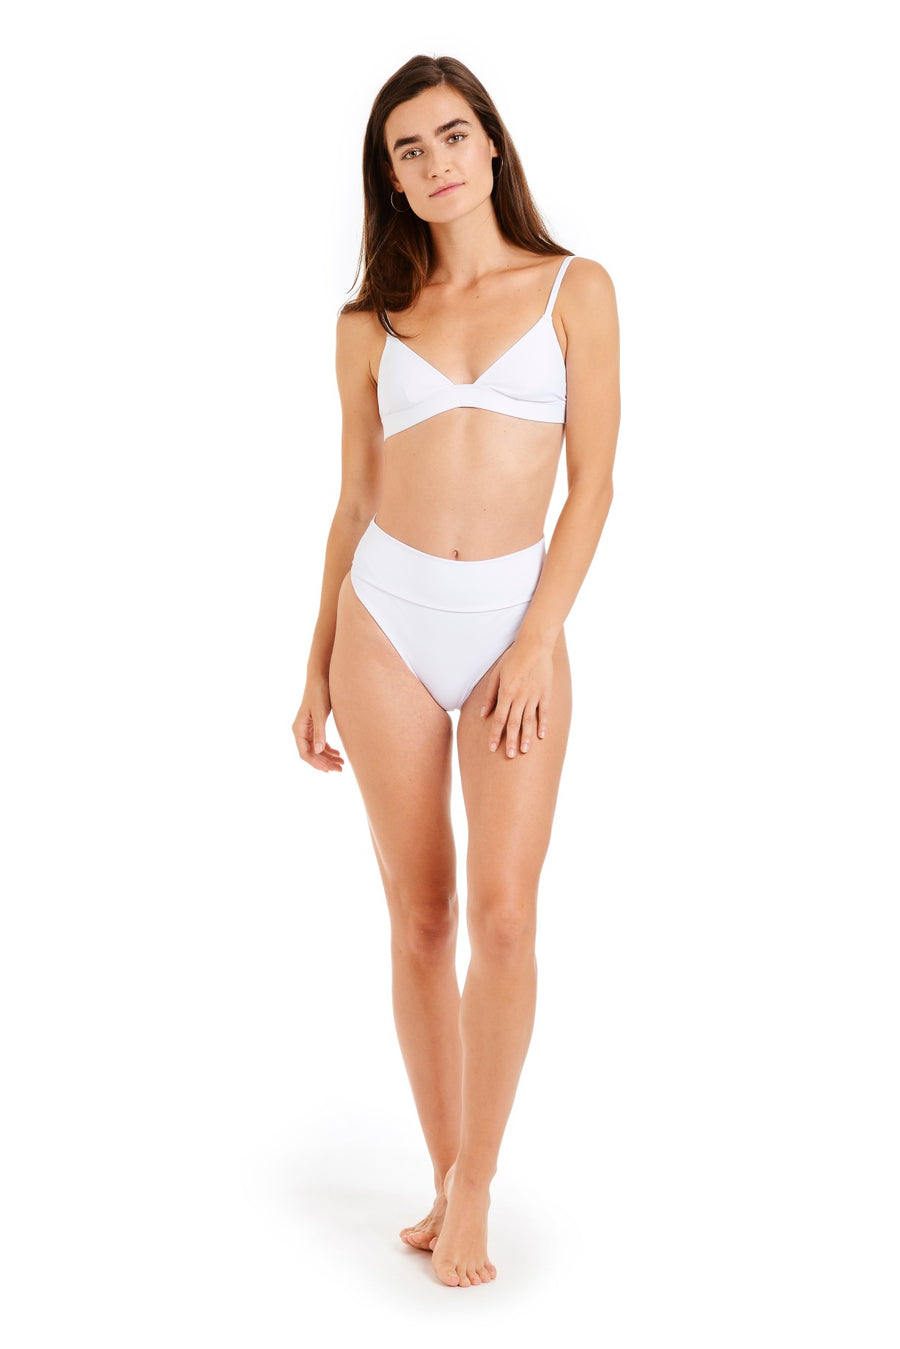 Front view of a woman wearing white swimsuit bottoms